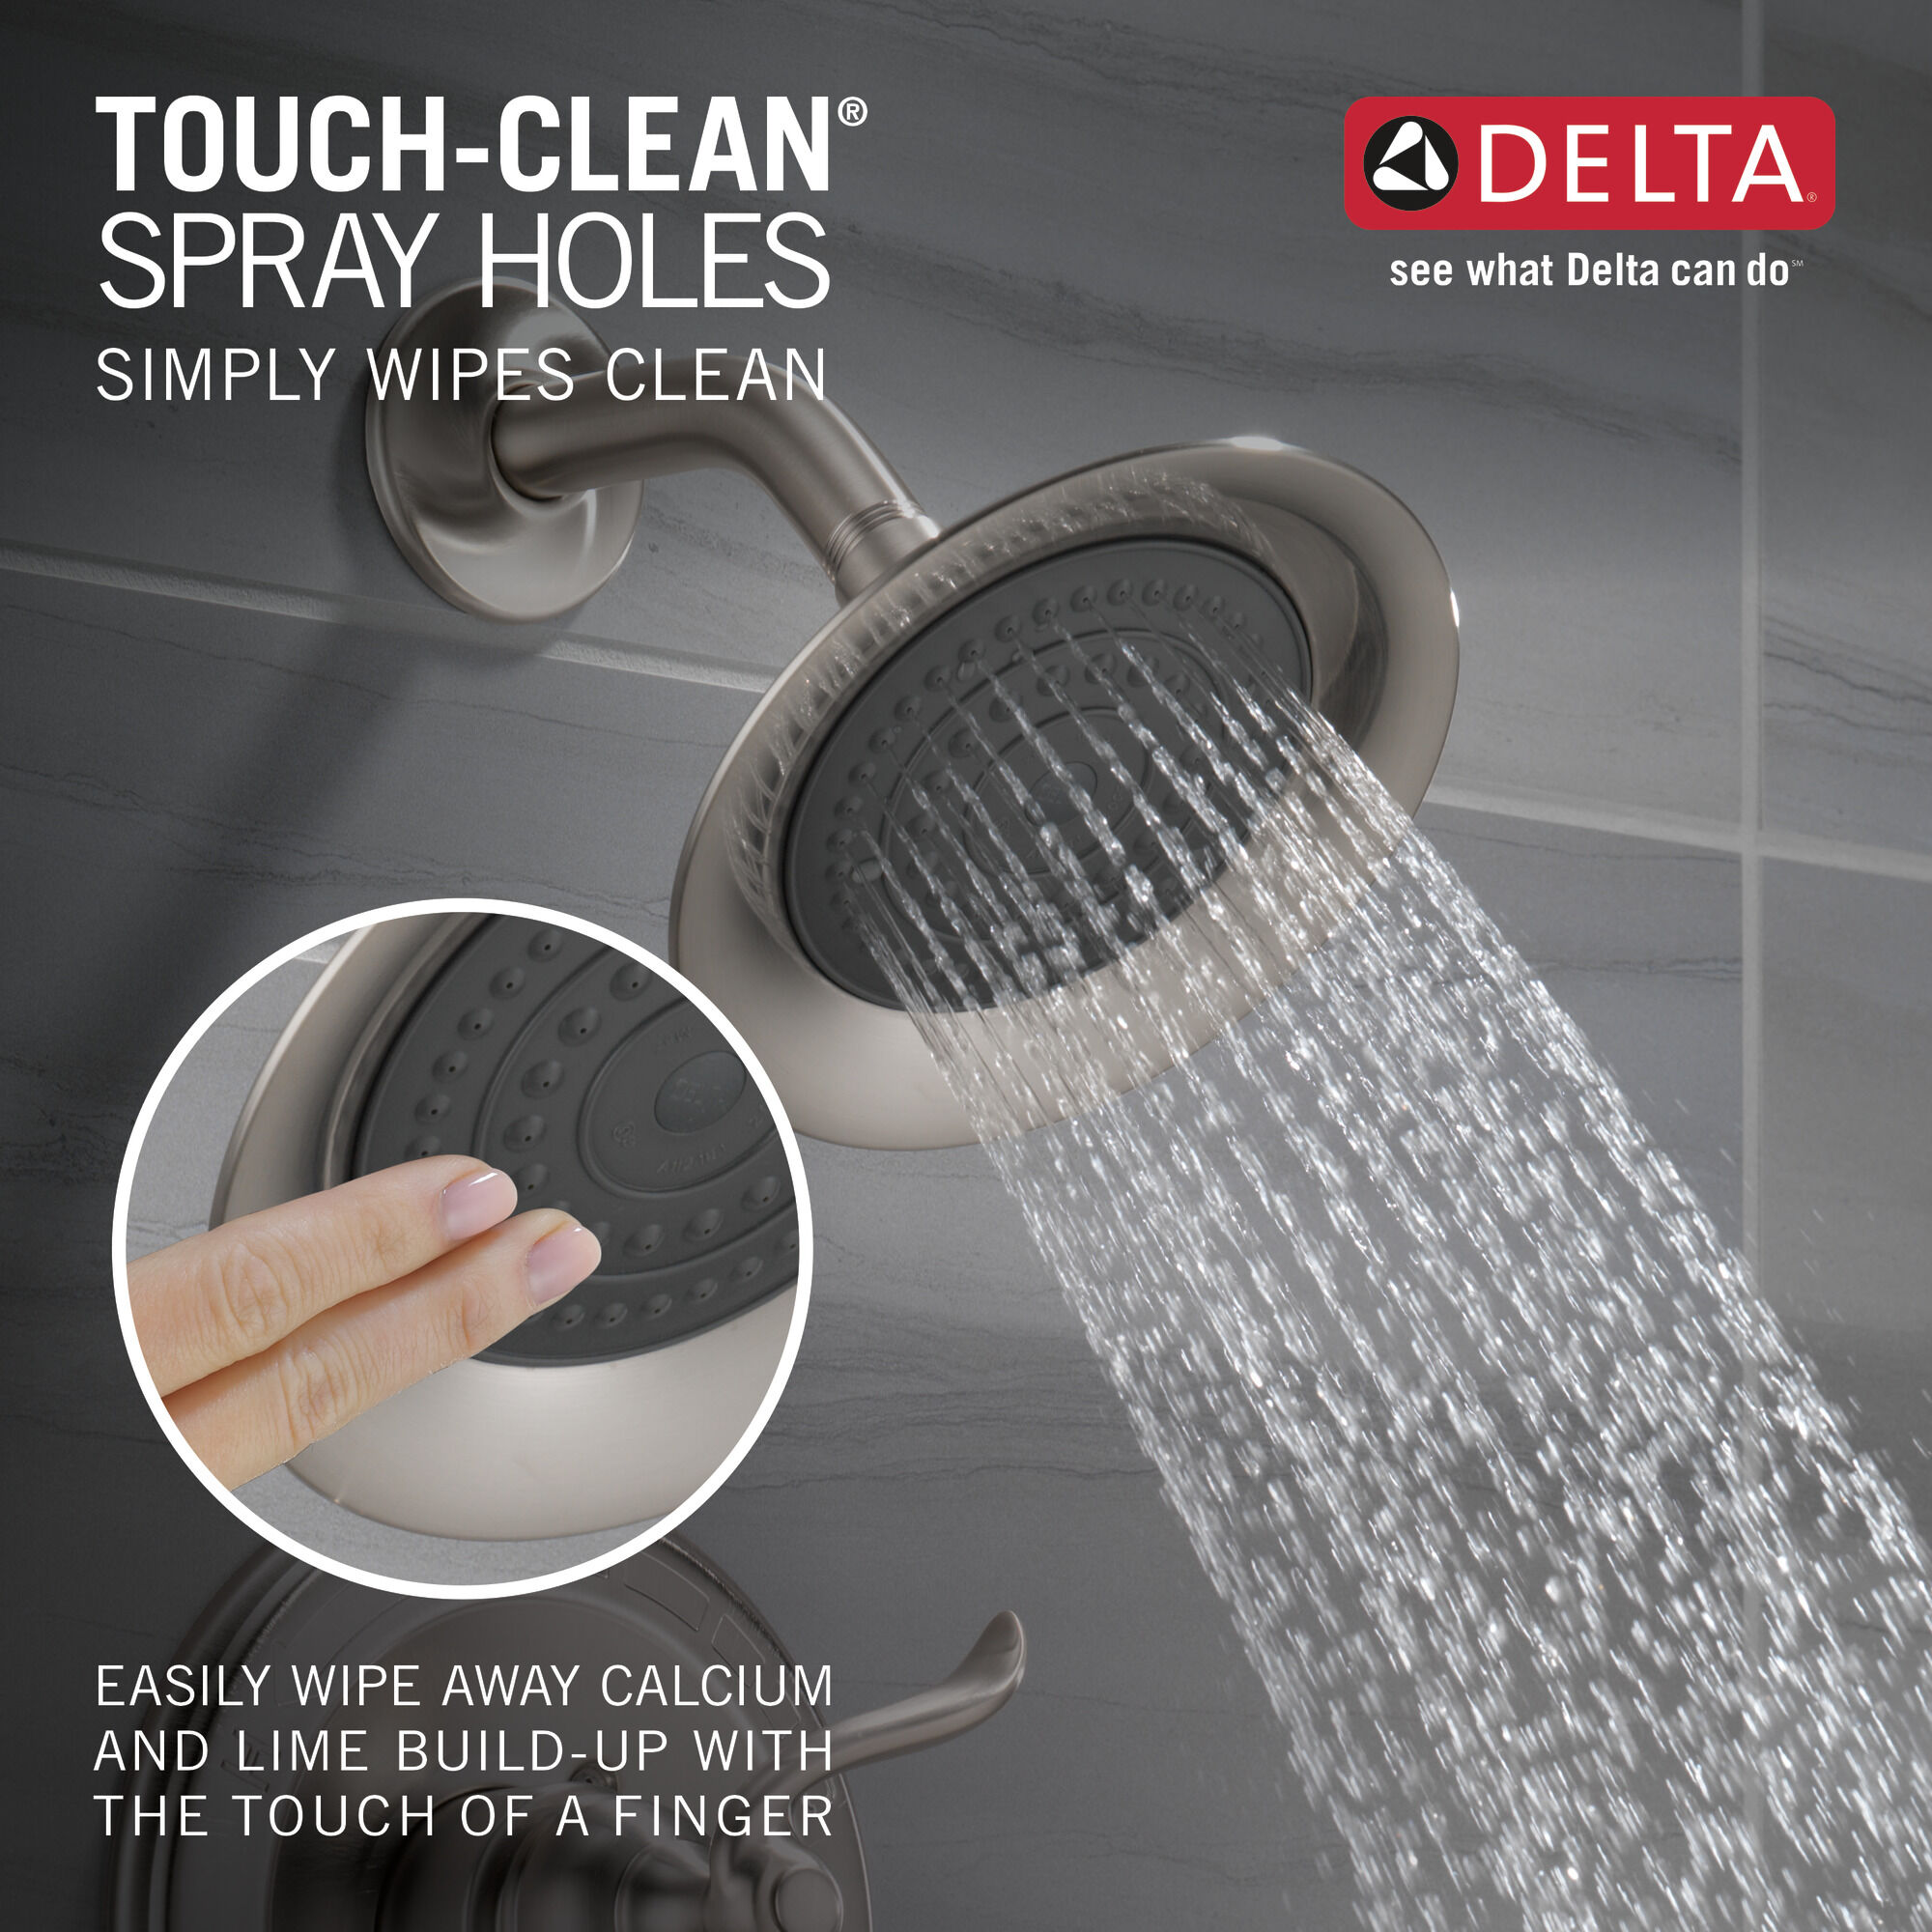 Monitor® 14 Series Shower Trim in Stainless BT14296-SS | Delta Faucet